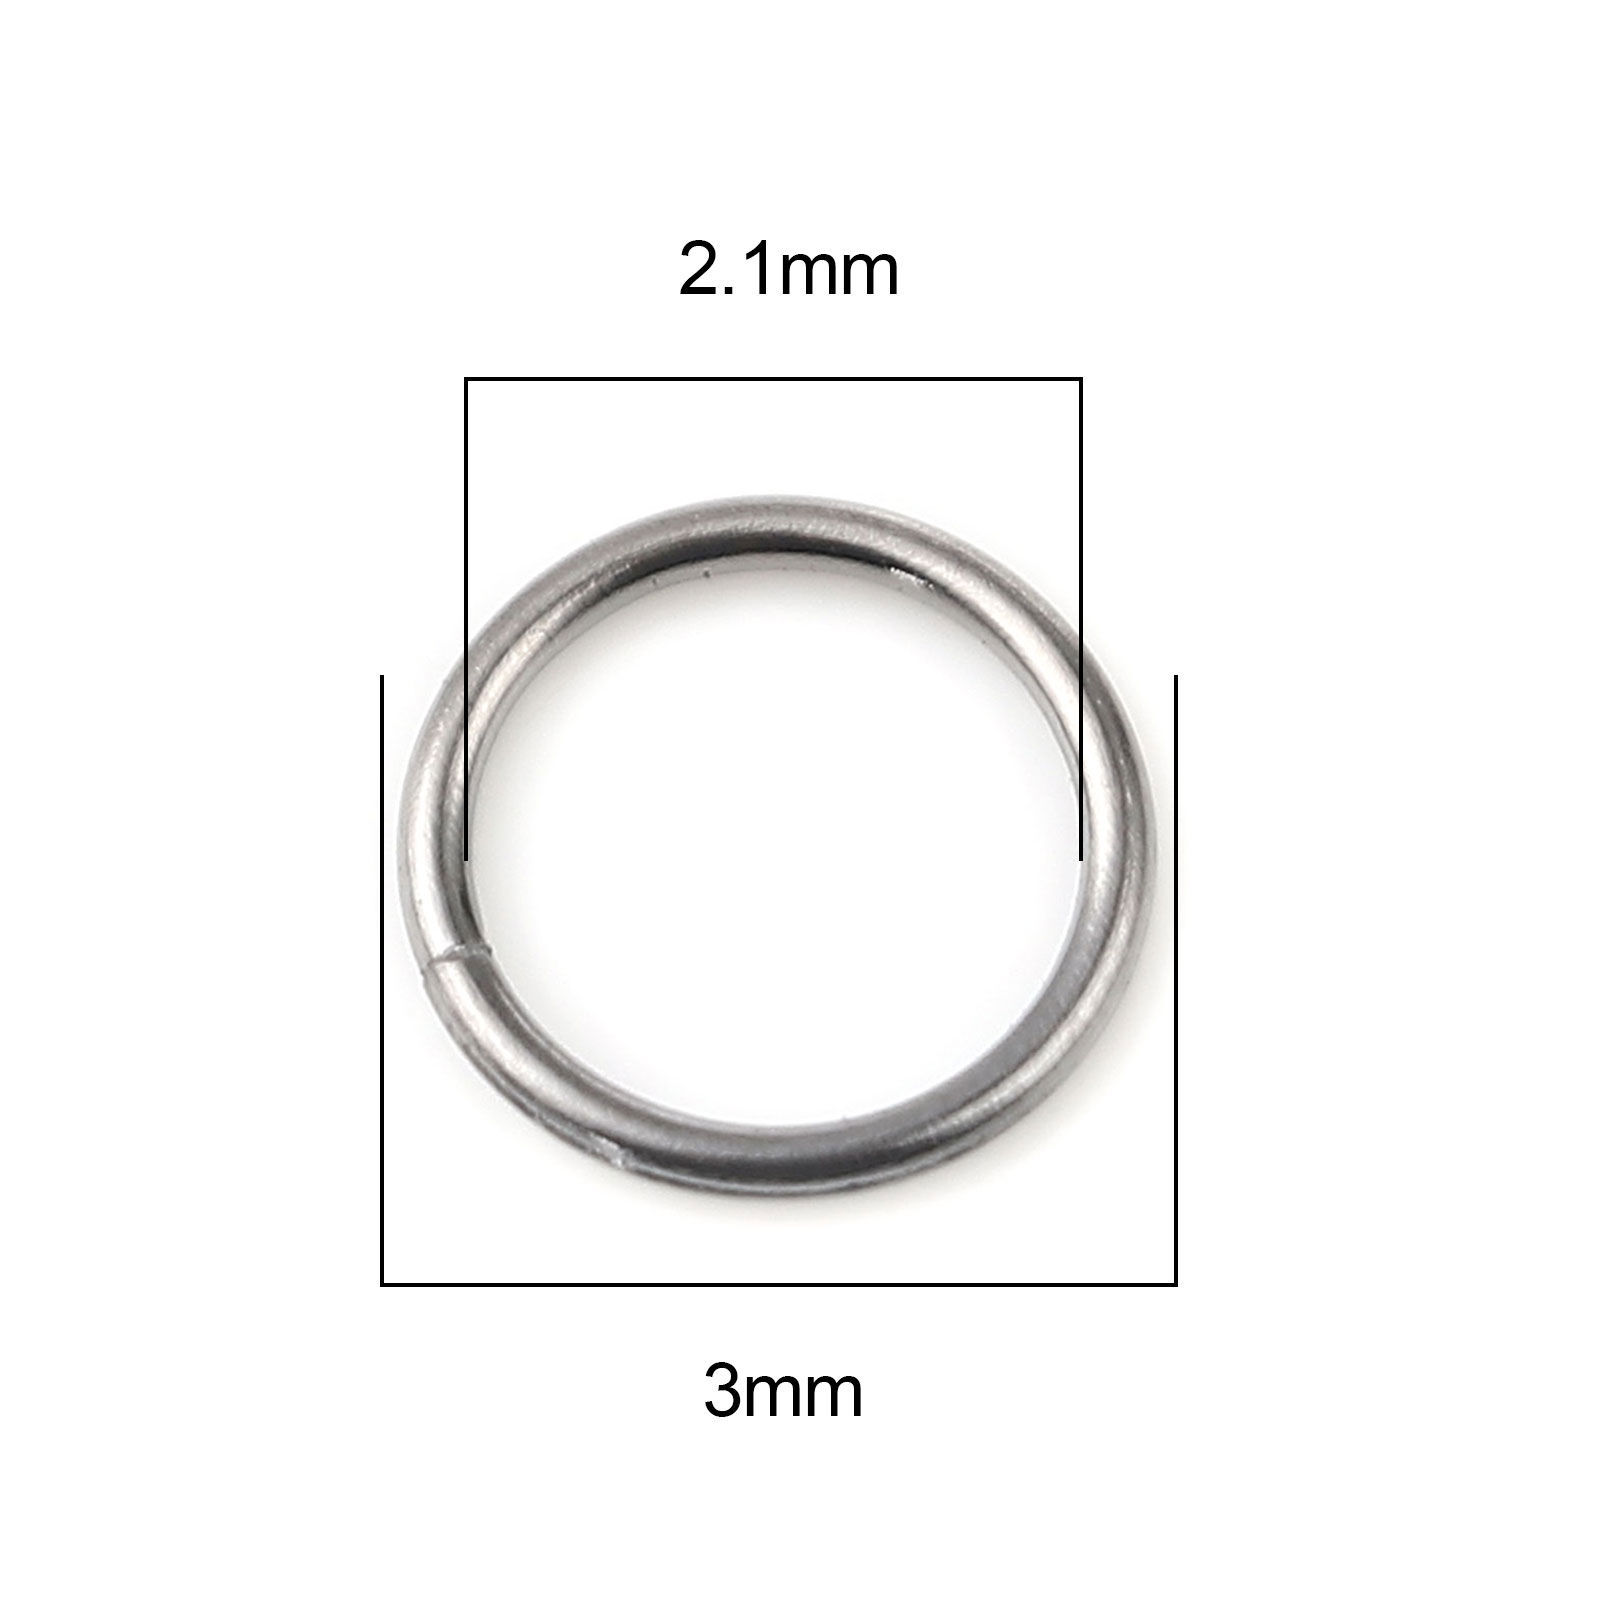 Picture of 0.5mm Iron Based Alloy Open Jump Rings Findings Circle Ring Gunmetal 3mm Dia, 200 PCs